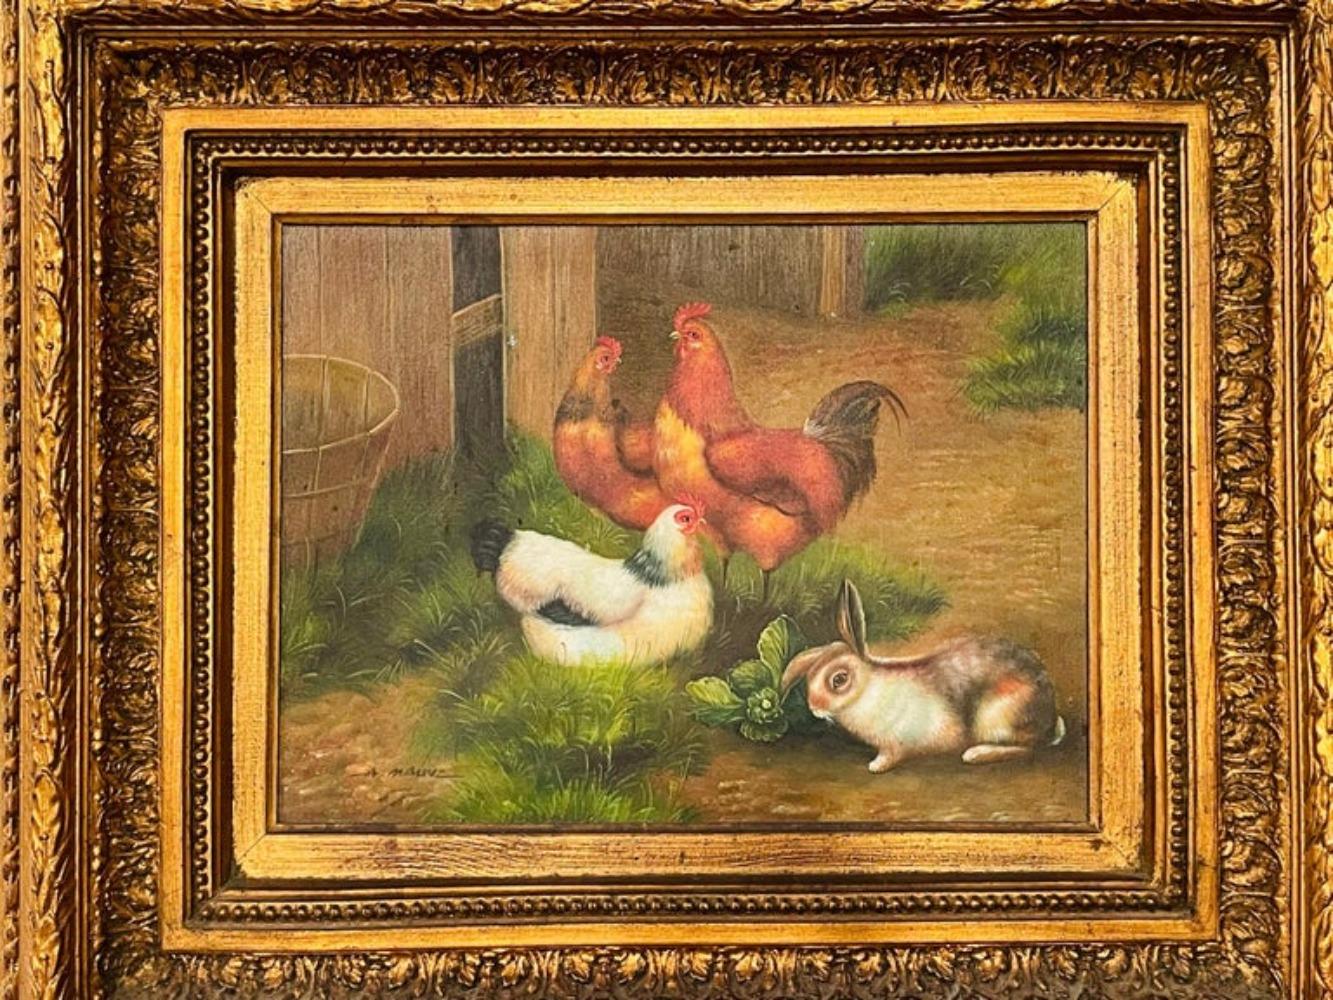 Vintage Oil Painting of Roosters and Bunny in the Manner of Claude Guilleminet - Brown Animal Painting by A.Marle